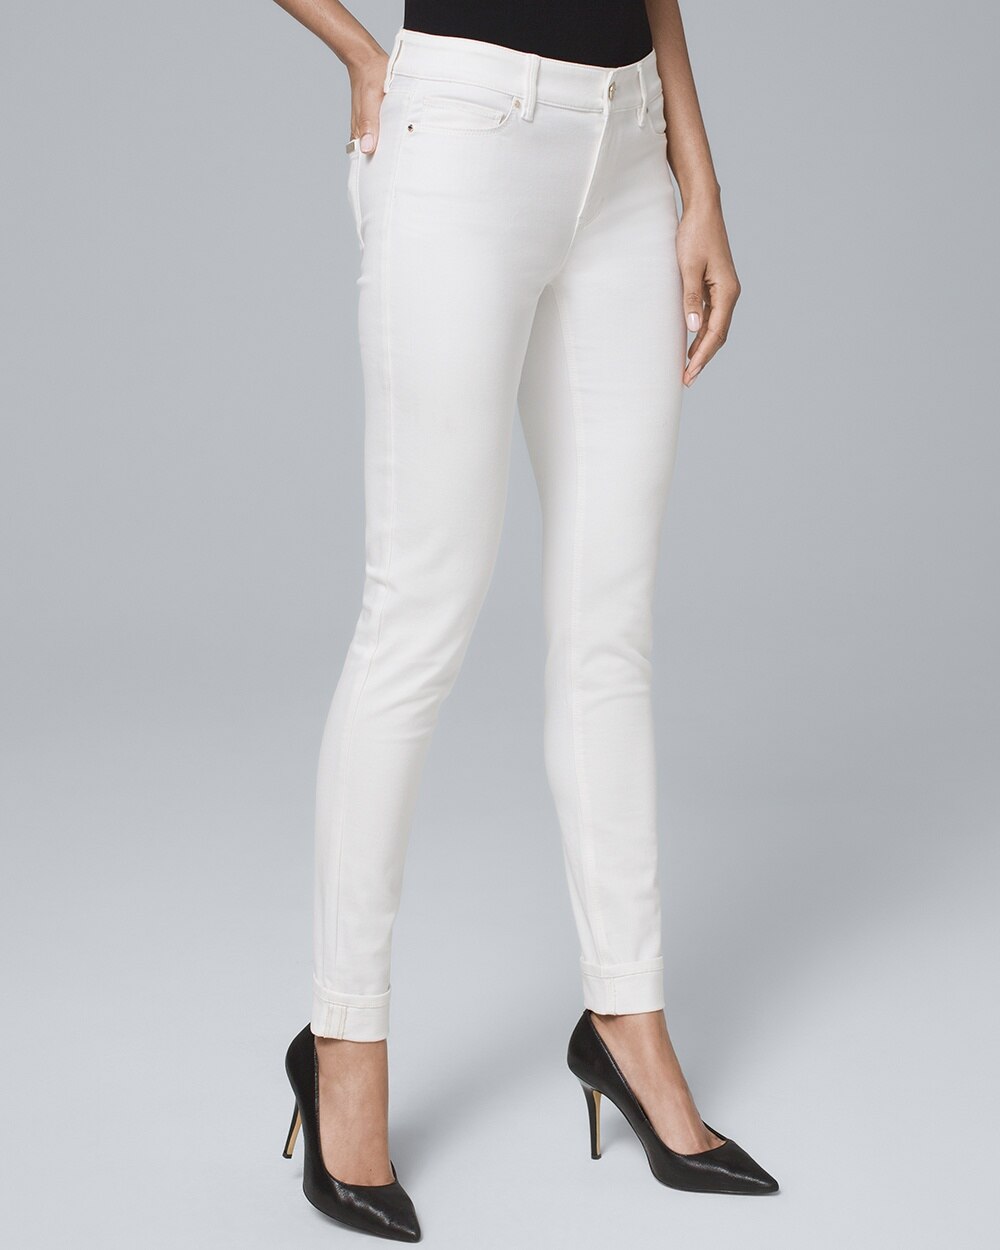 low rise white jeans